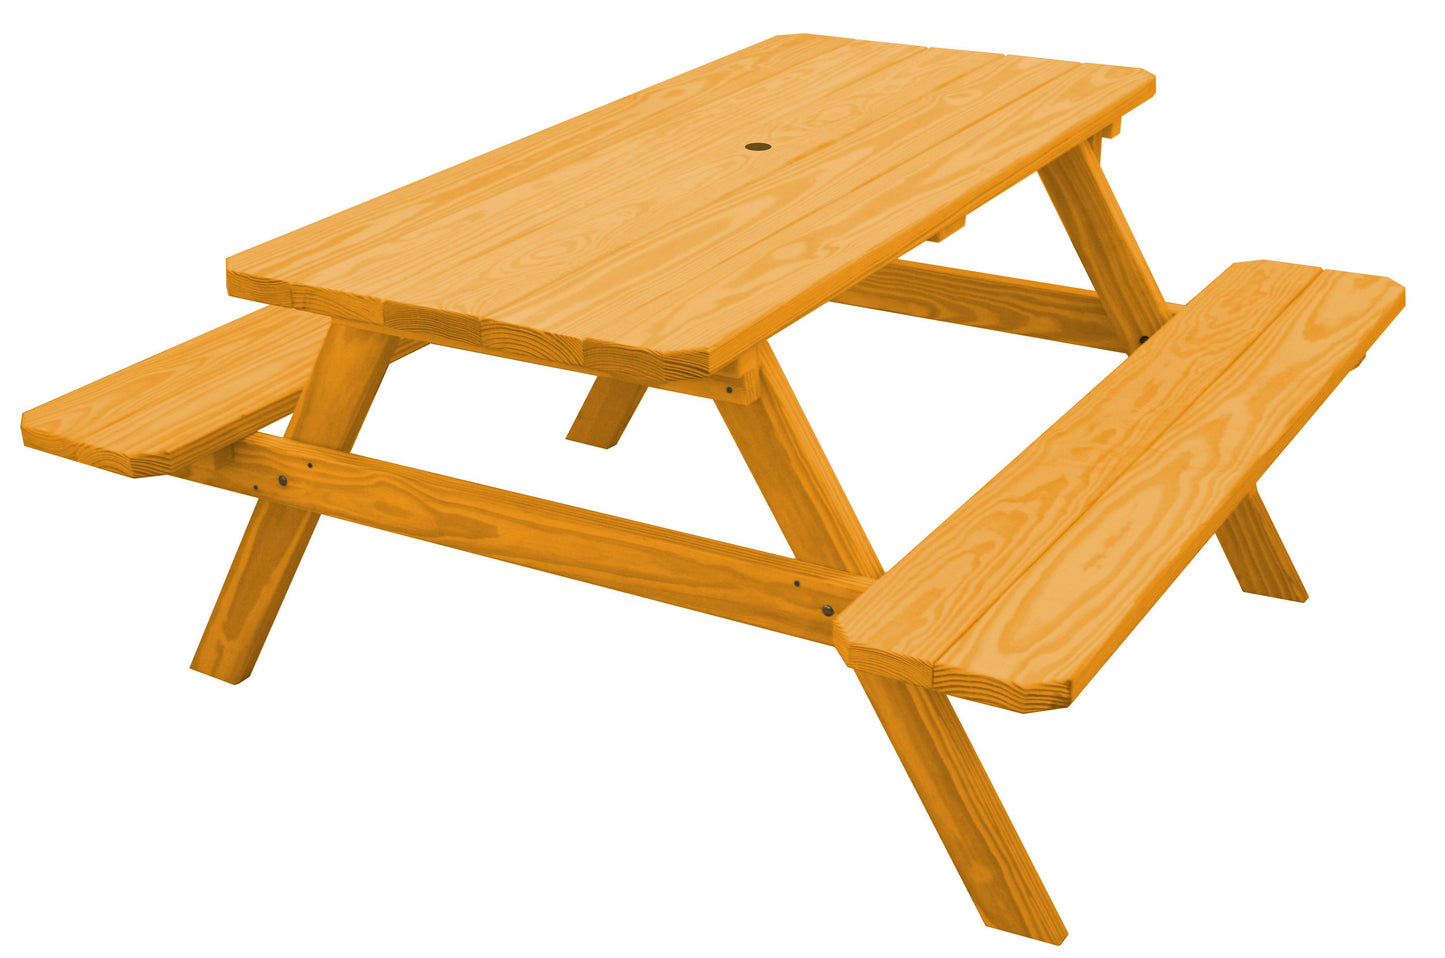 A&L Furniture Co. Yellow Pine 5' Picnic Table with Attached Benches - LEAD TIME TO SHIP 10 BUSINESS DAYS